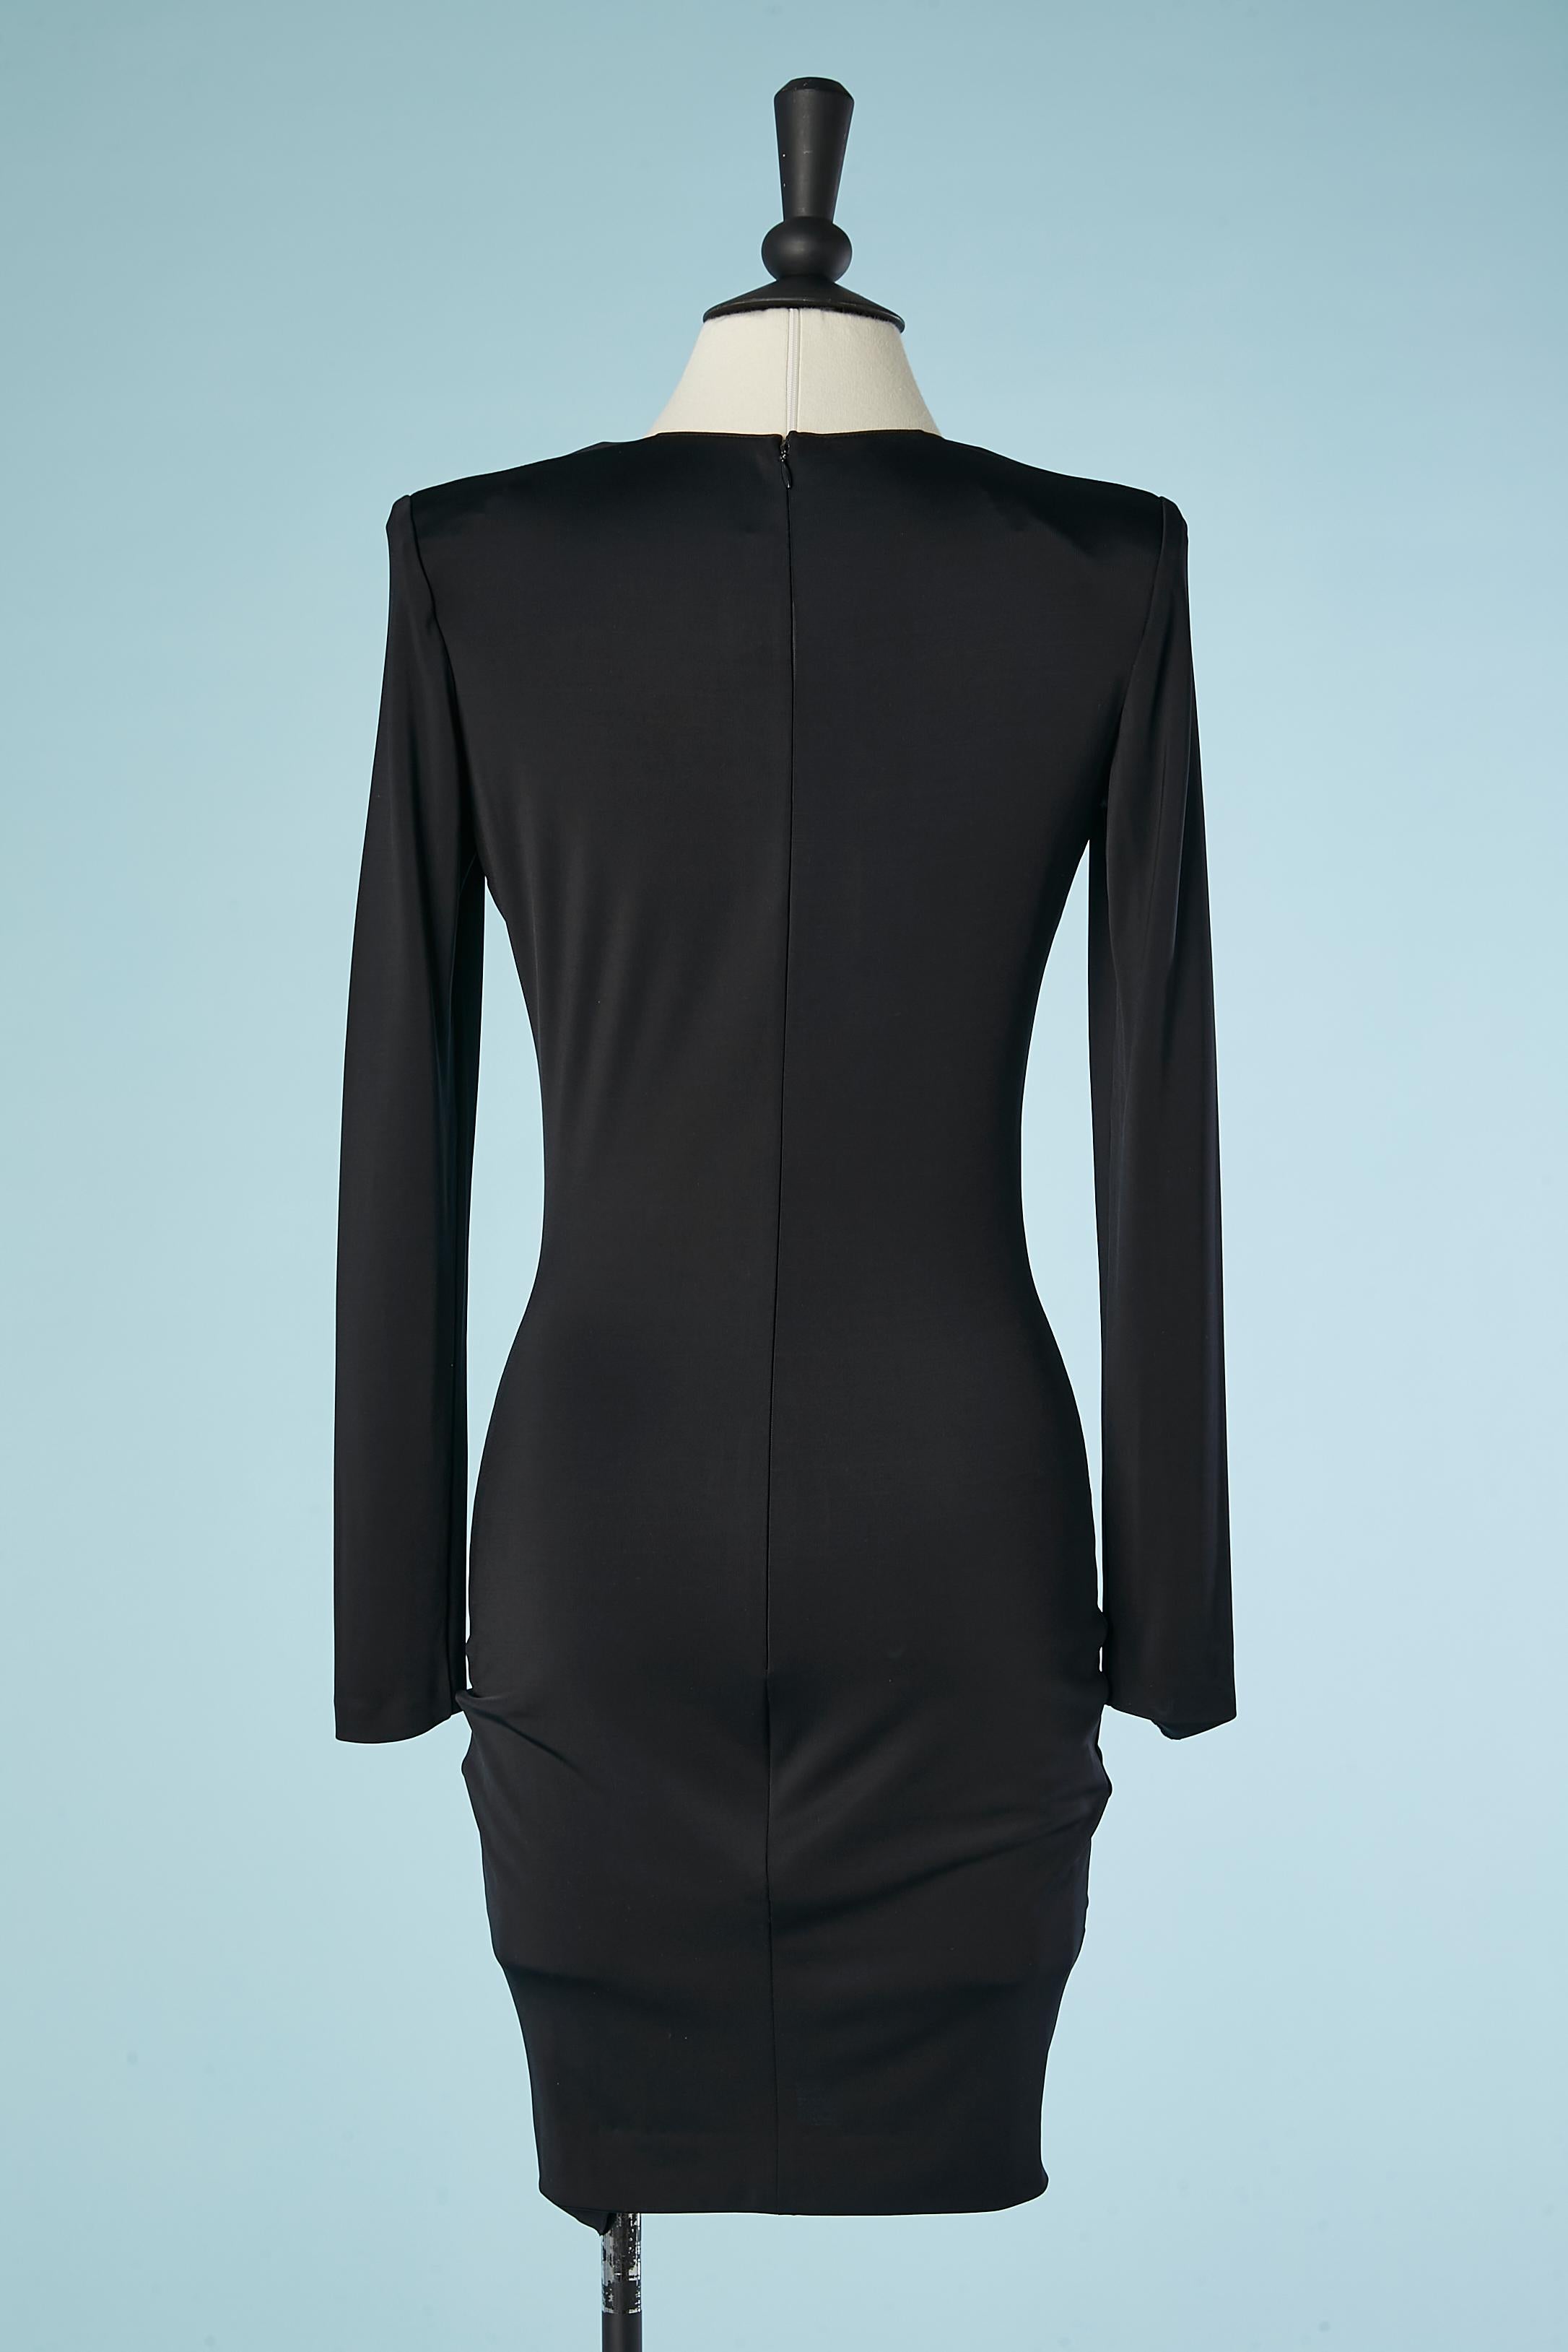 Women's Black draped cocktail dress with leather details middle front Azzaro Paris  For Sale